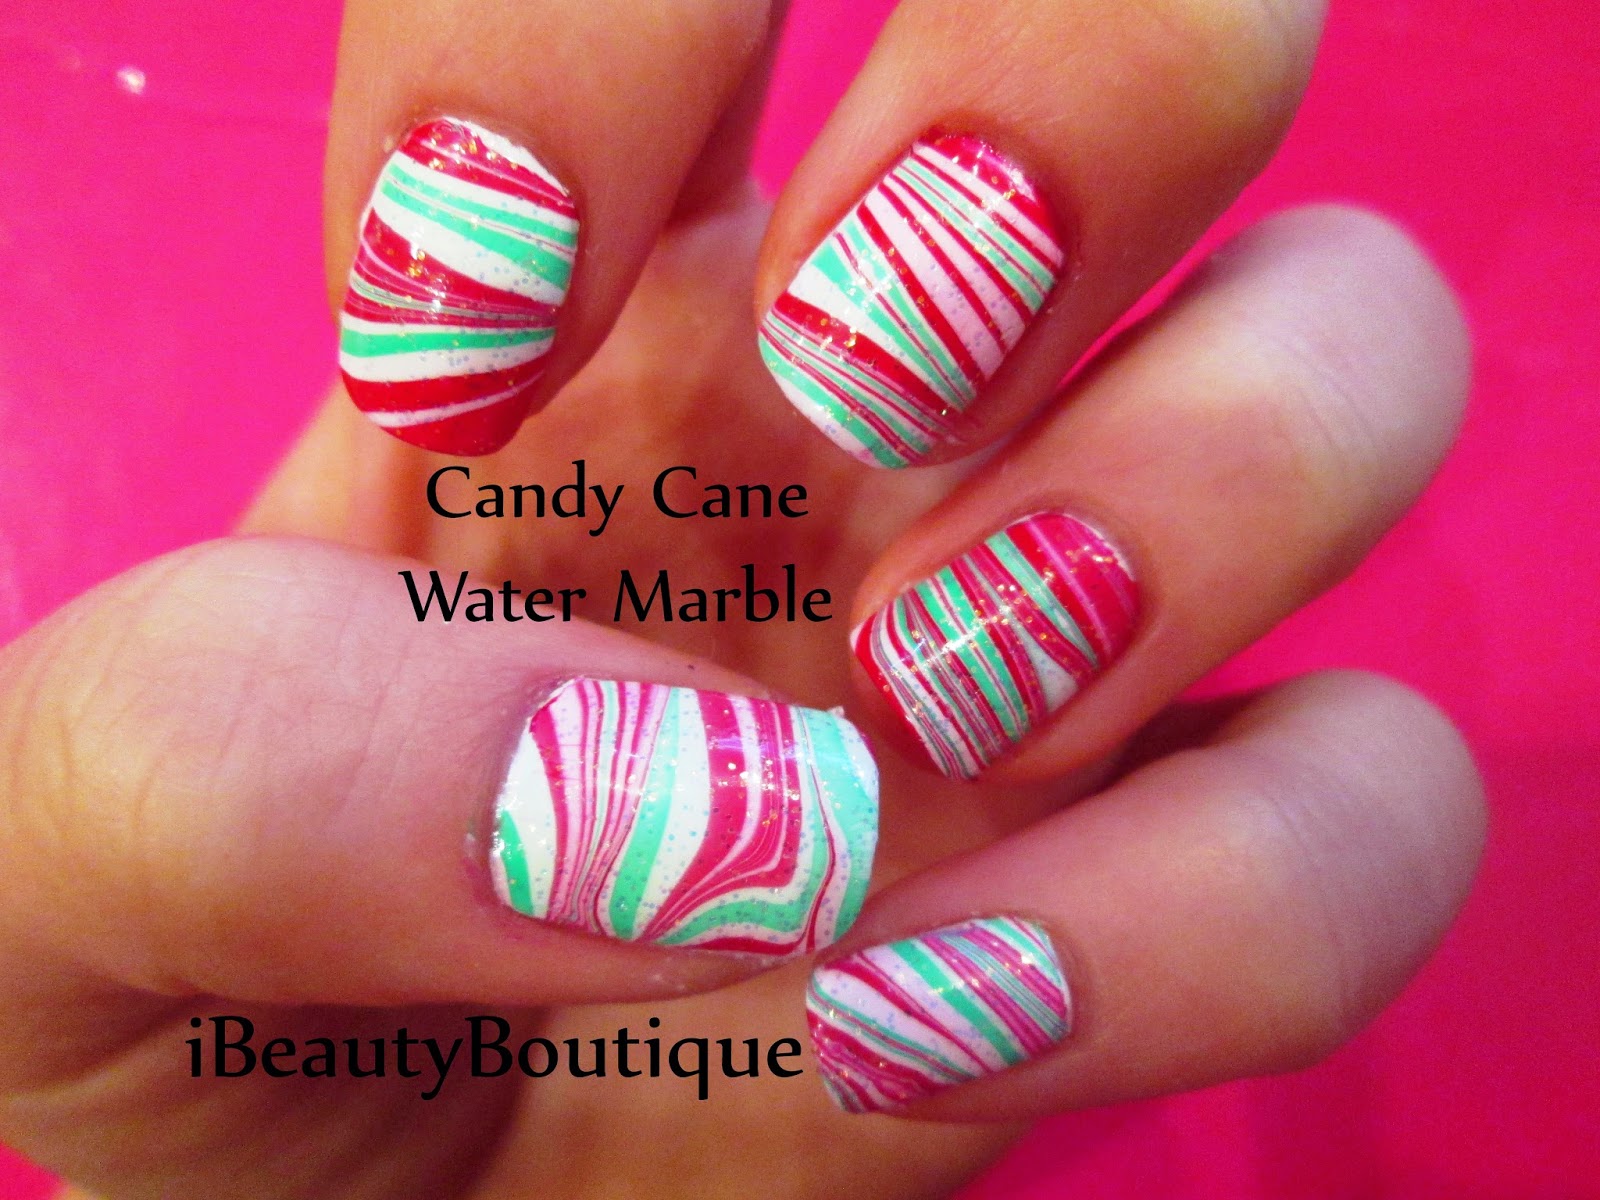 6. Red and White Candy Cane Nail Art on Pinterest - wide 9